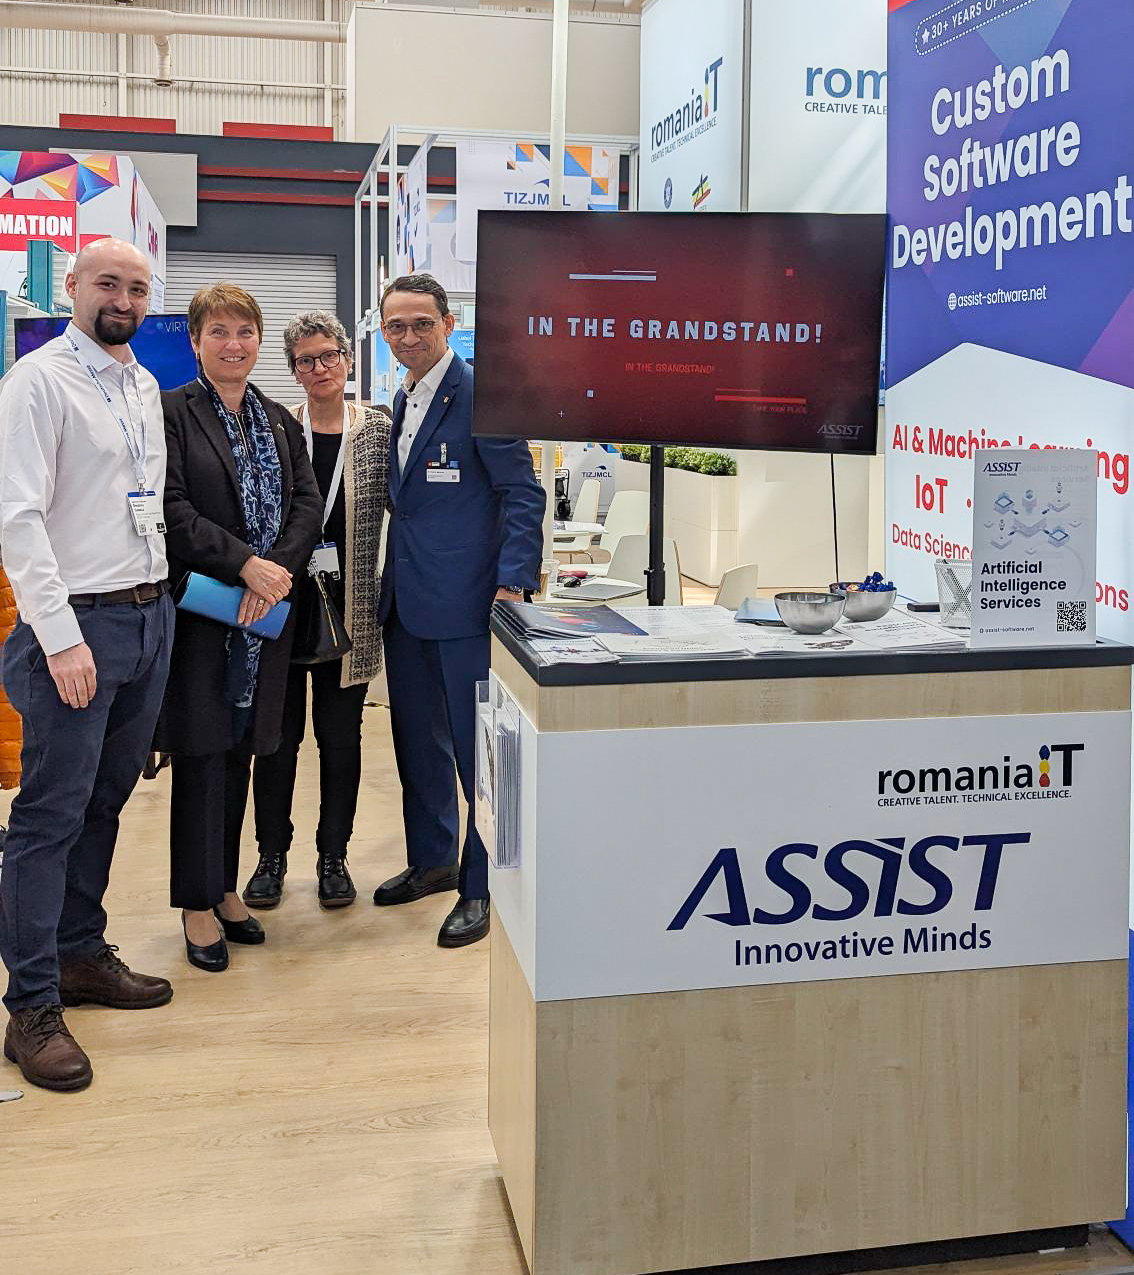 Her Excellency Adriana Stănescu, Romania's ambassador to Germany, at the ASSIST Software stand